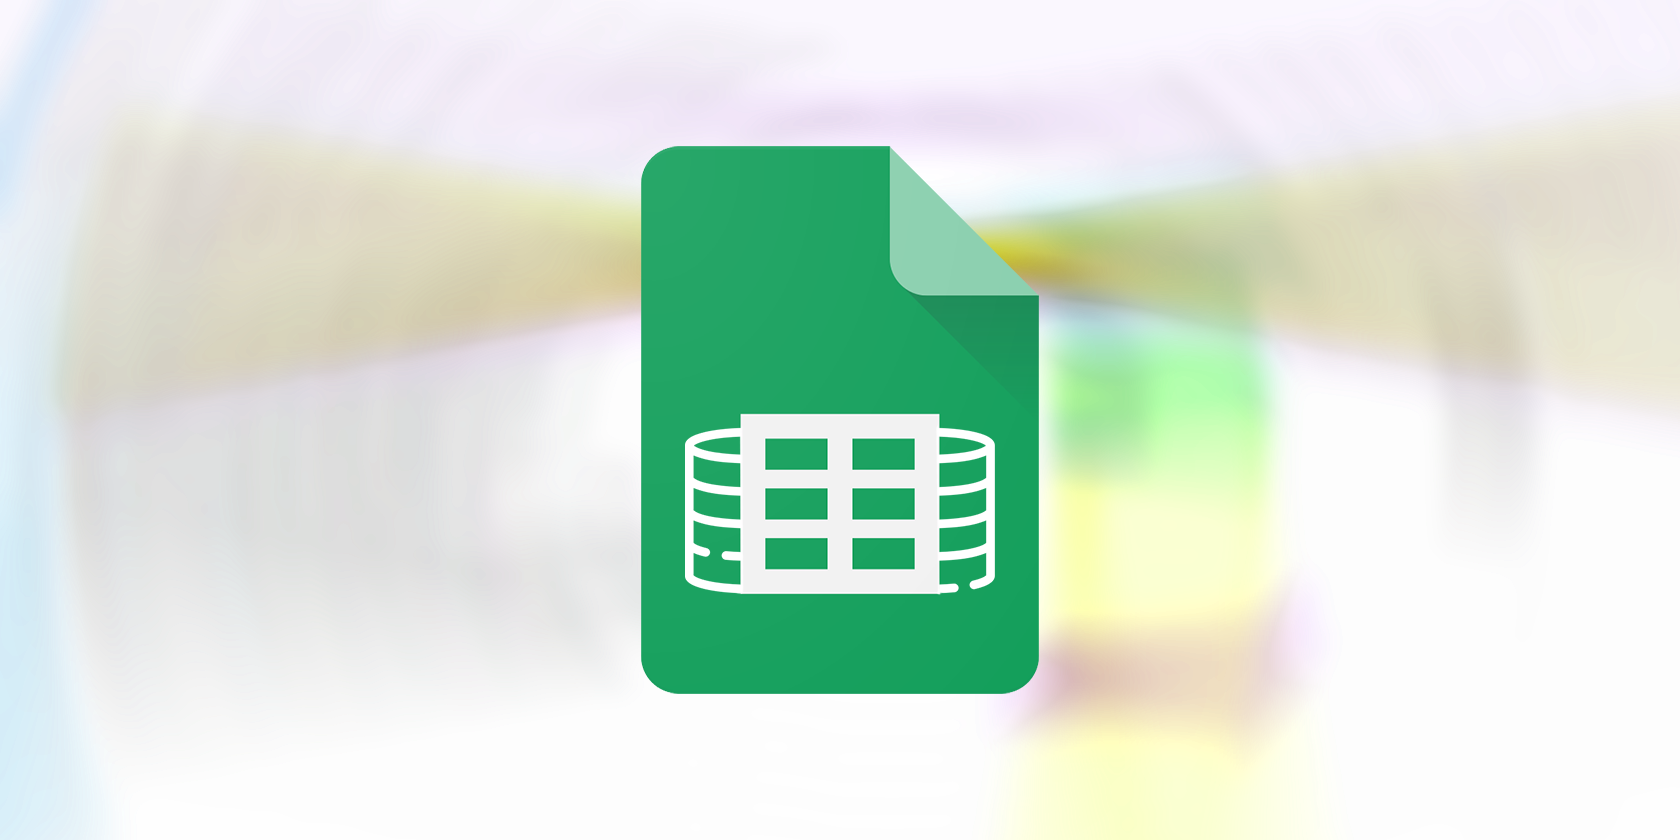 Google Sheets logo with data banks on the side